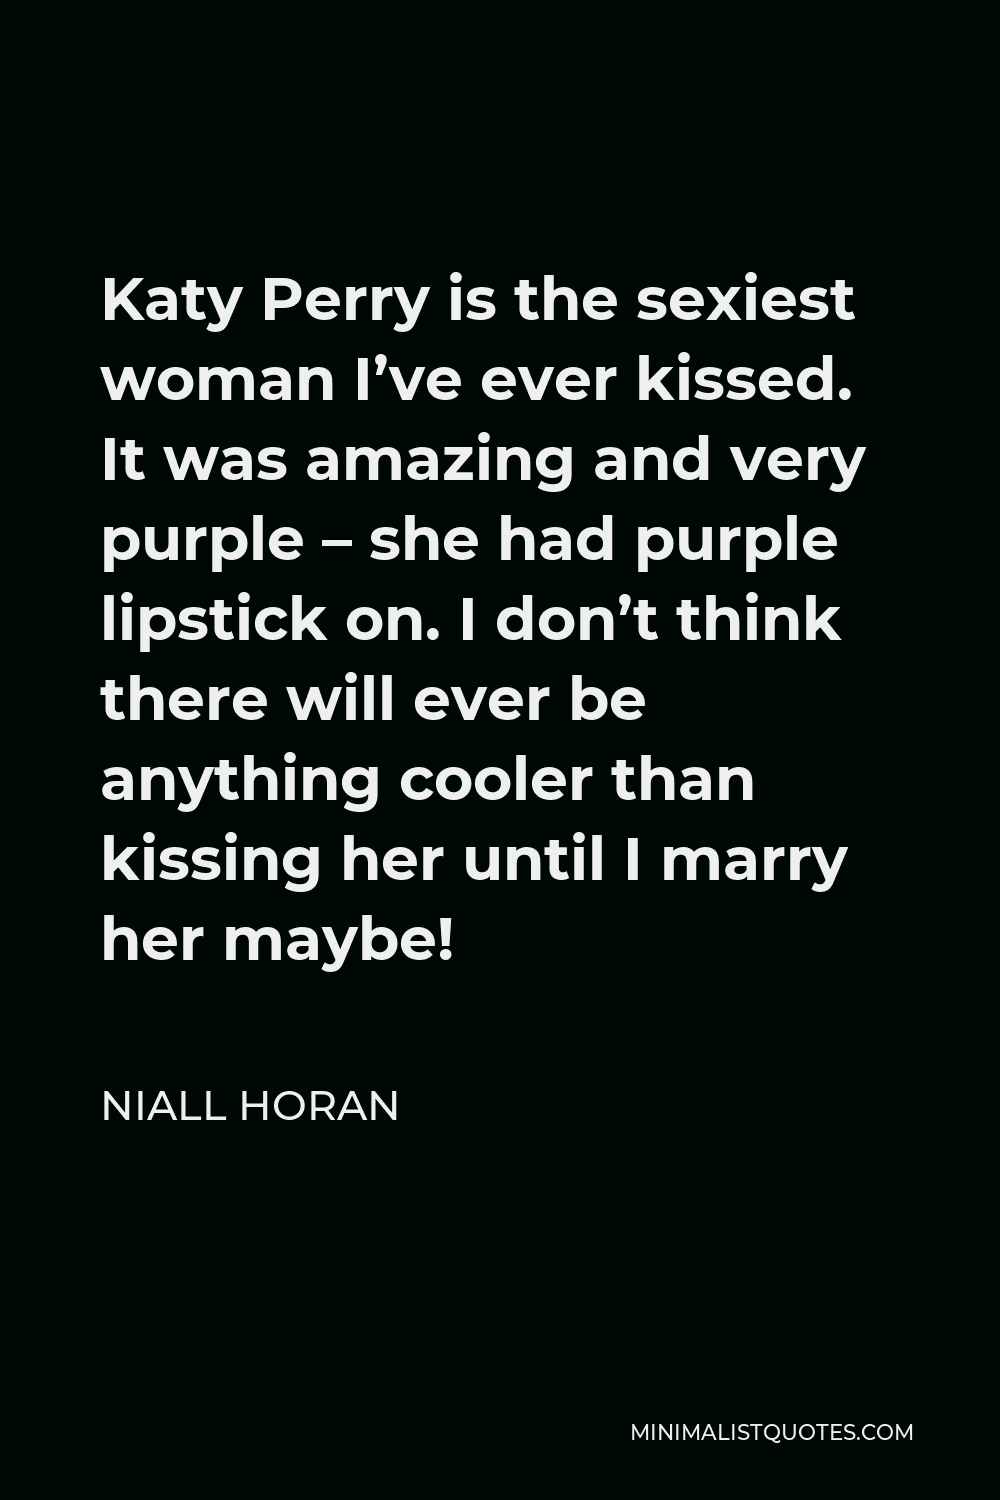 Niall Horan Quote - Katy Perry is the sexiest woman I’ve ever kissed. It was amazing and very purple – she had purple lipstick on. I don’t think there will ever be anything cooler than kissing her until I marry her maybe!